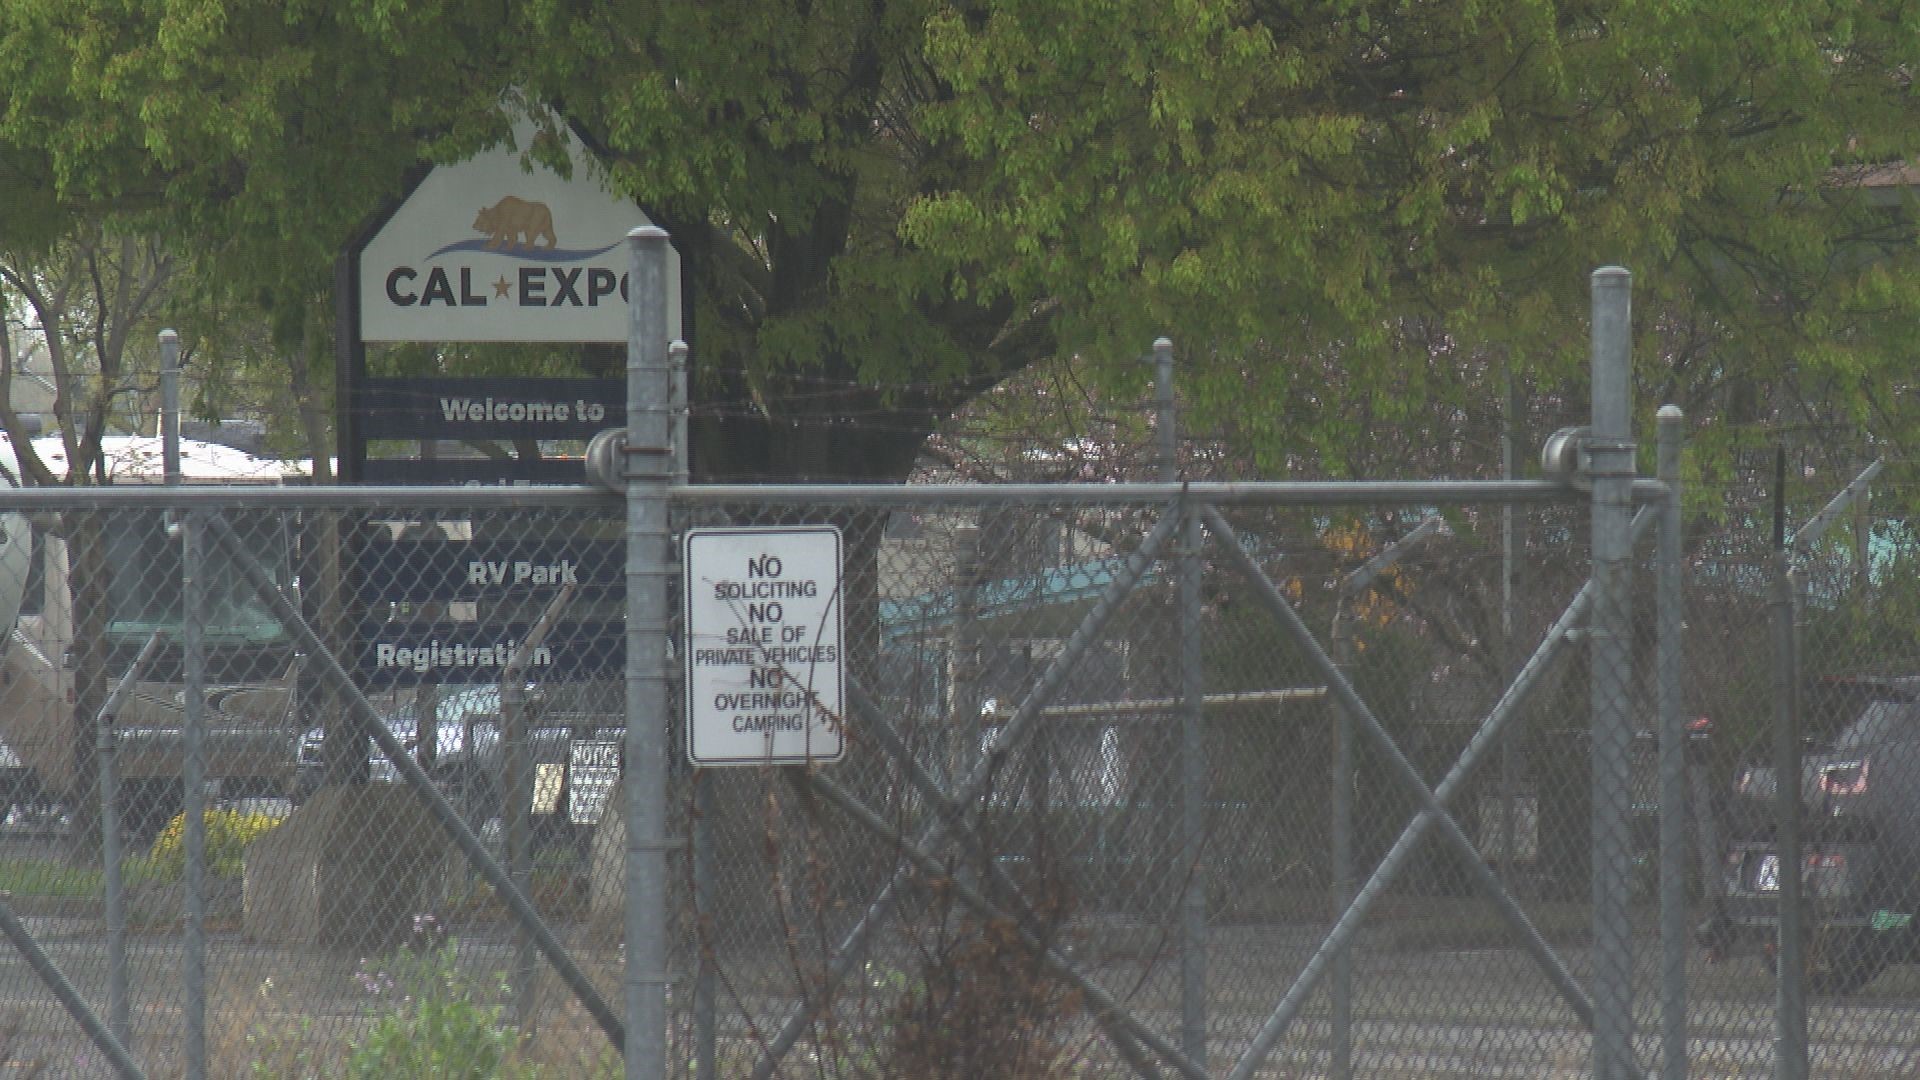 Sacramento city officials are providing more details into a homeless shelter that could be built on a parking lot at Cal Expo. Officials say the shelter would house at least 100 people per year and allow the homeless to bring their partners, pets and belongings.